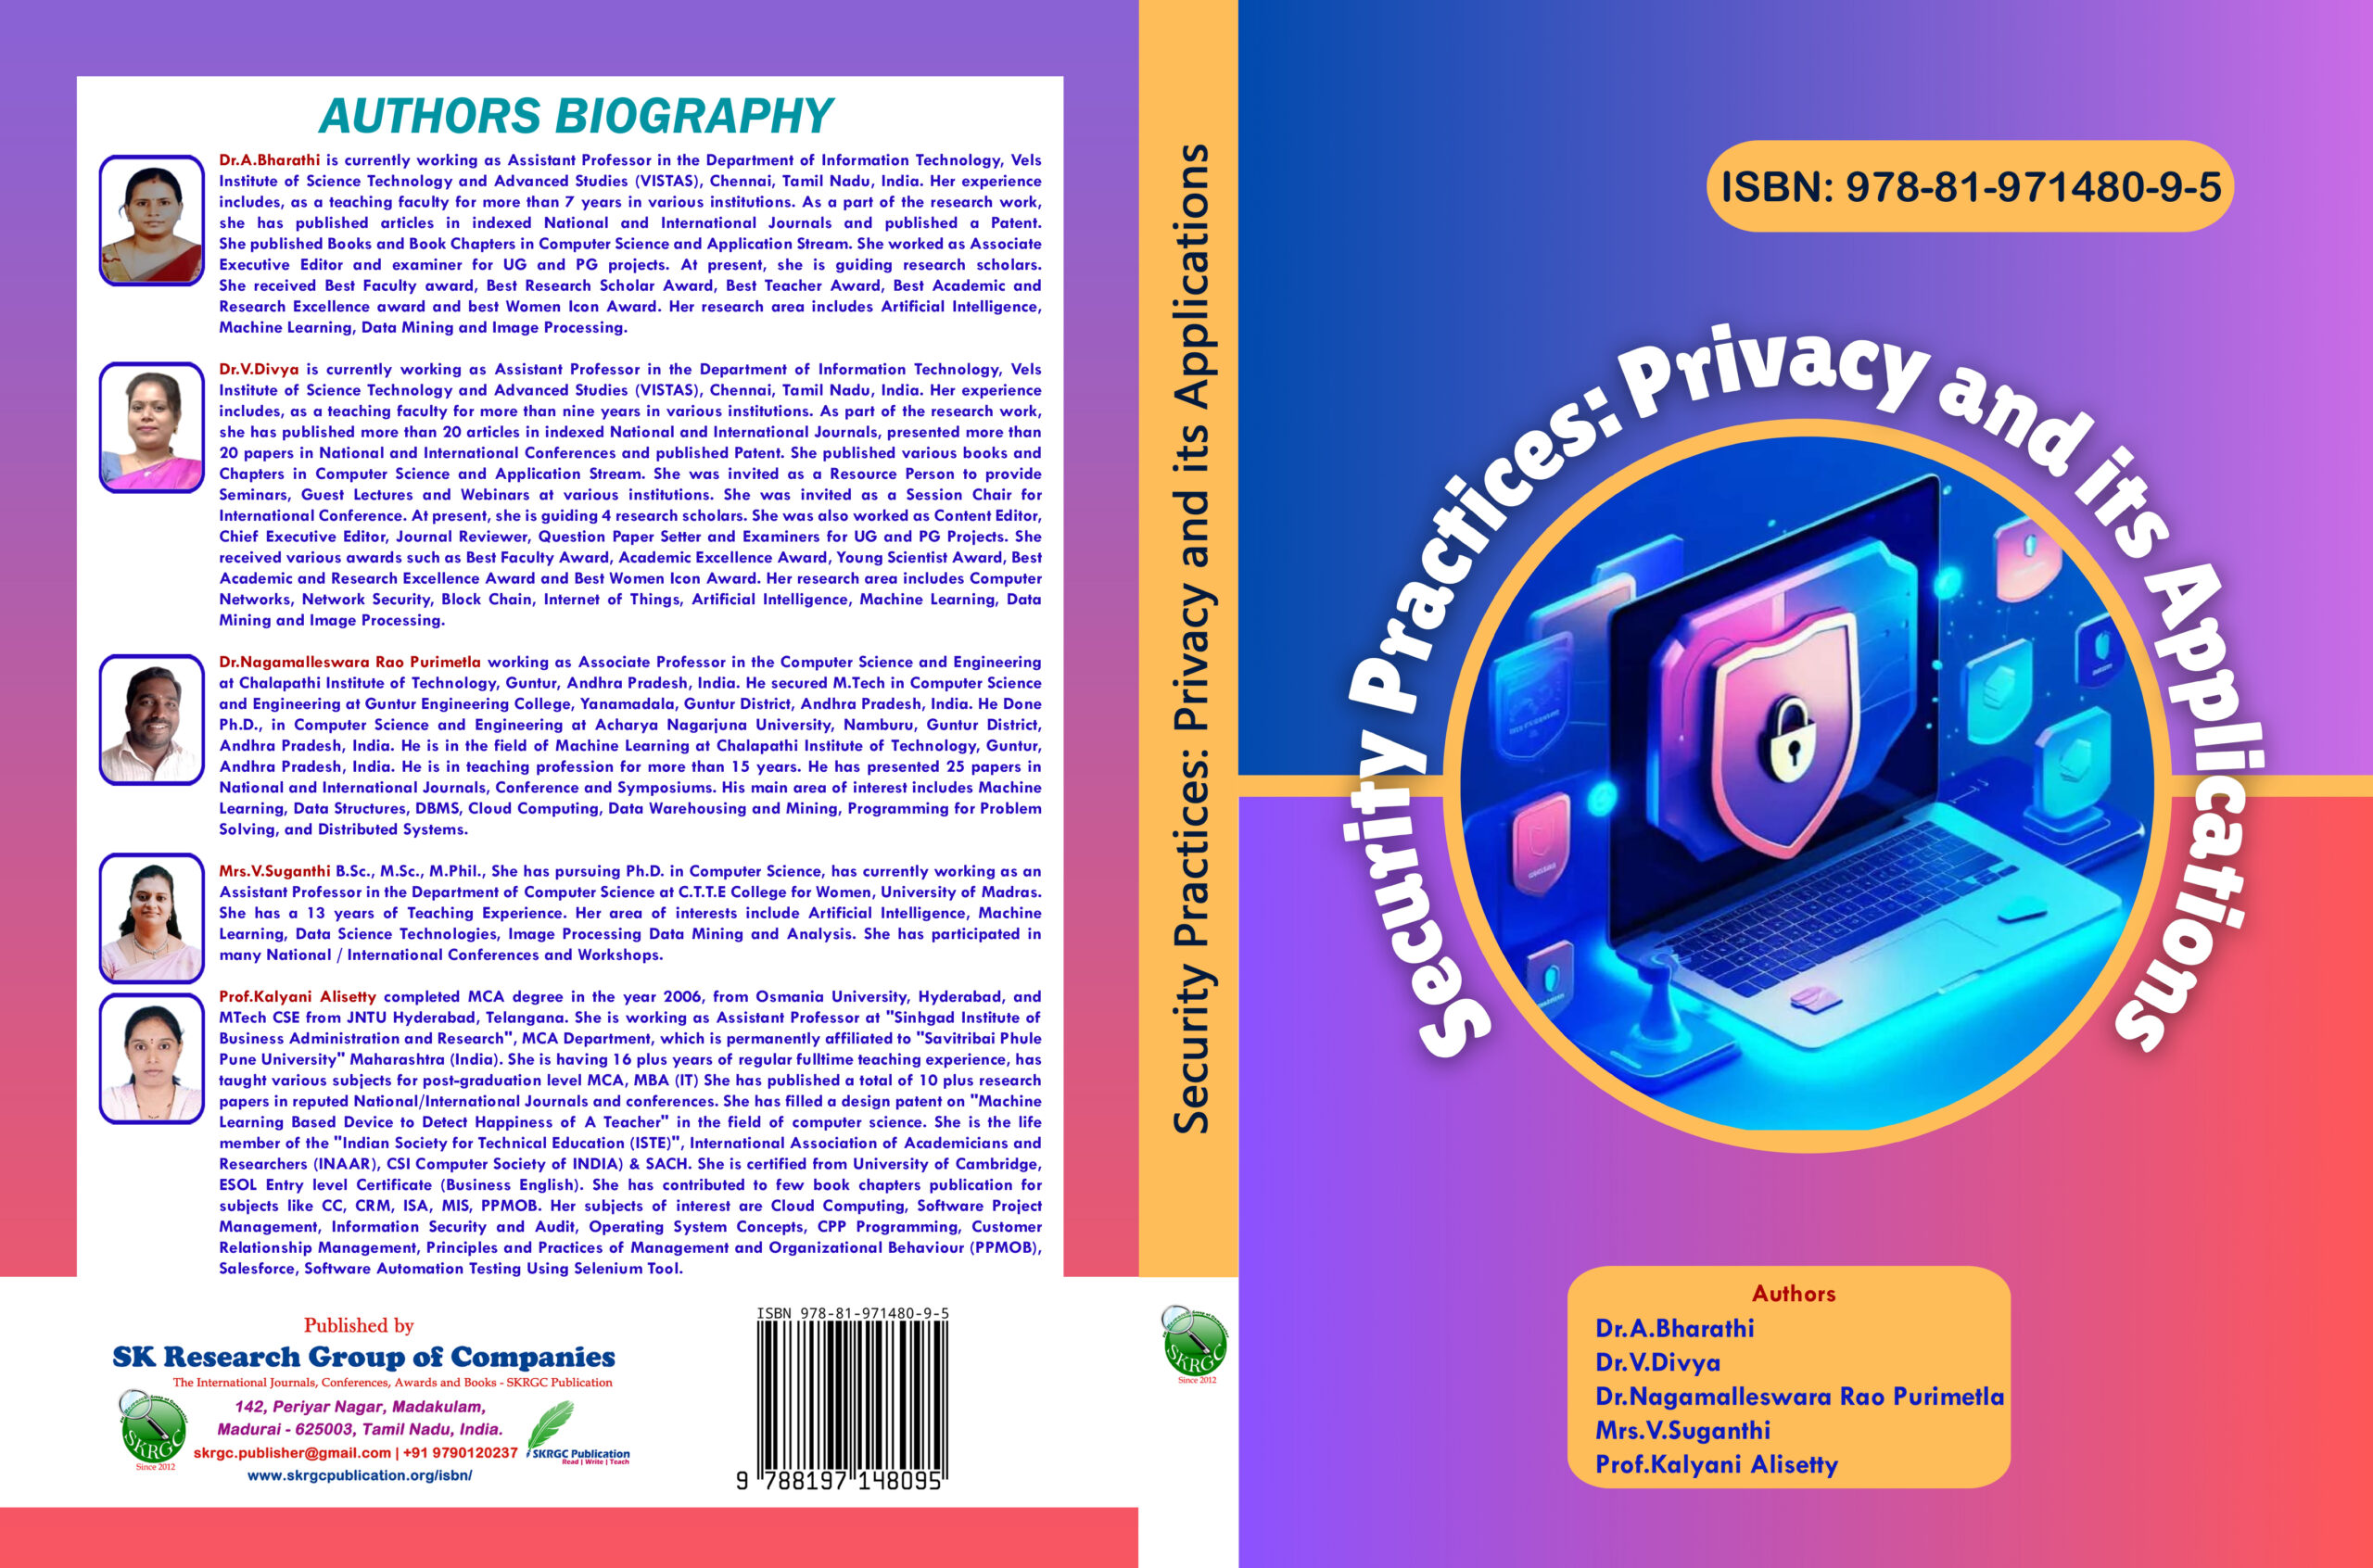 Security Practices: Privacy and its Applications